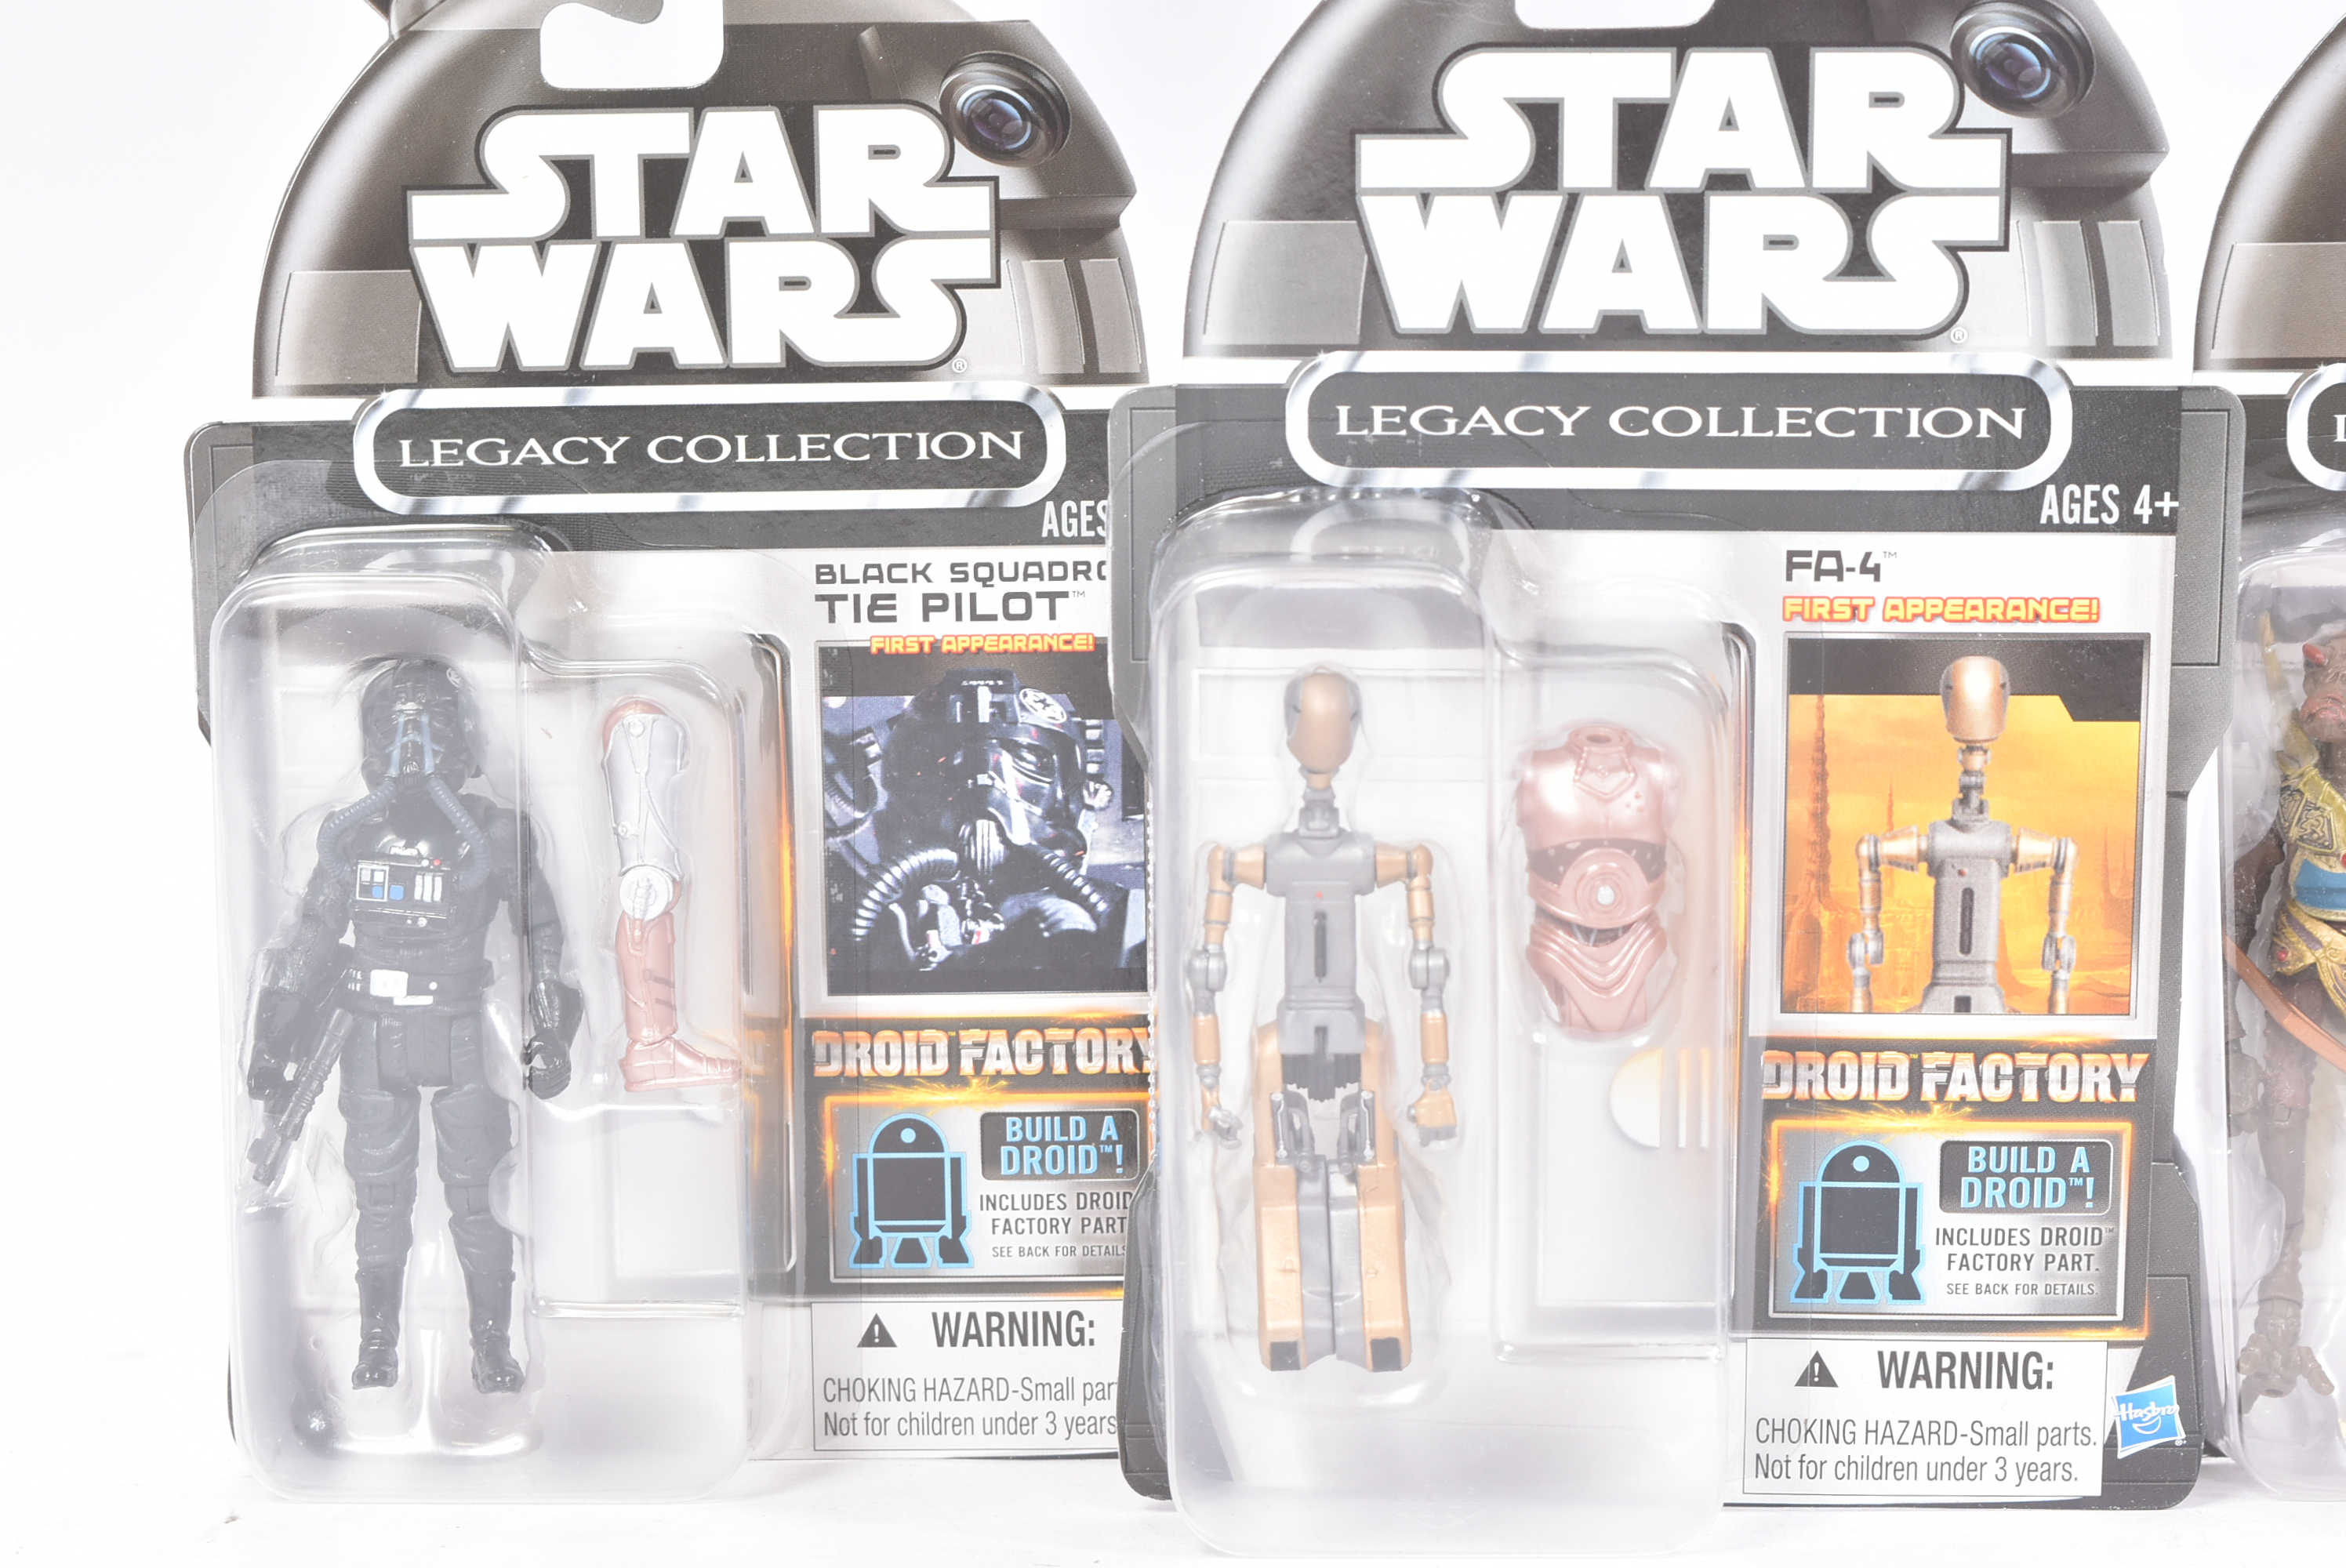 STAR WARS - LEGACY COLLECTION - TRADE BOX OF CARDED FIGURES - Image 3 of 5